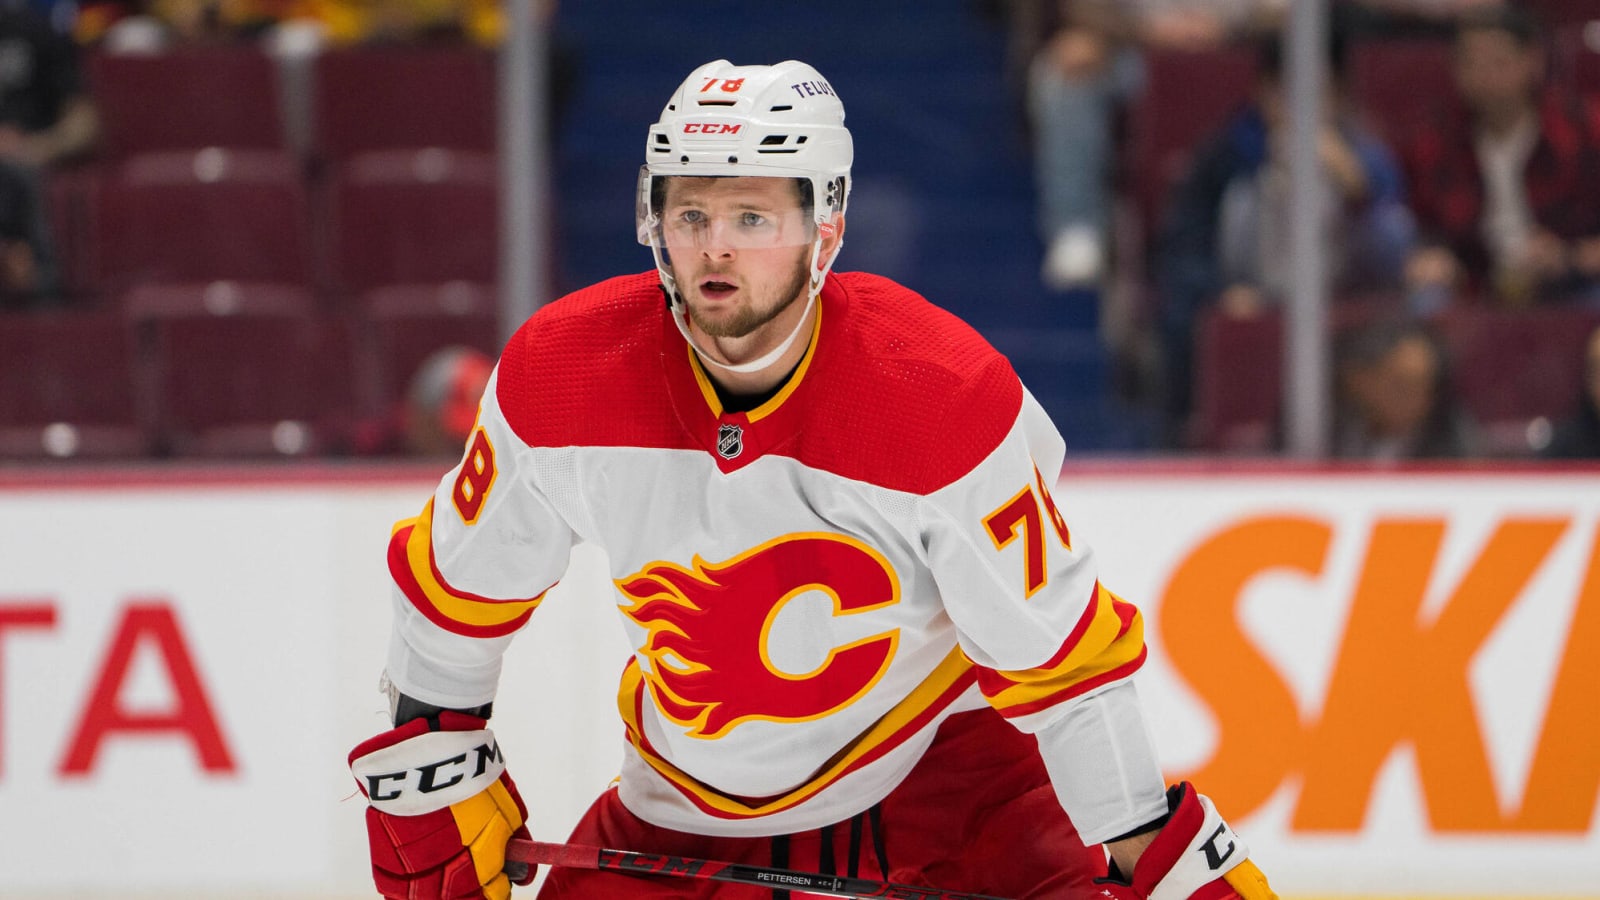 Calgary Flames re-sign restricted free agents Ben Jones and Emilio Pettersen (one-year, two-way, $775,000)